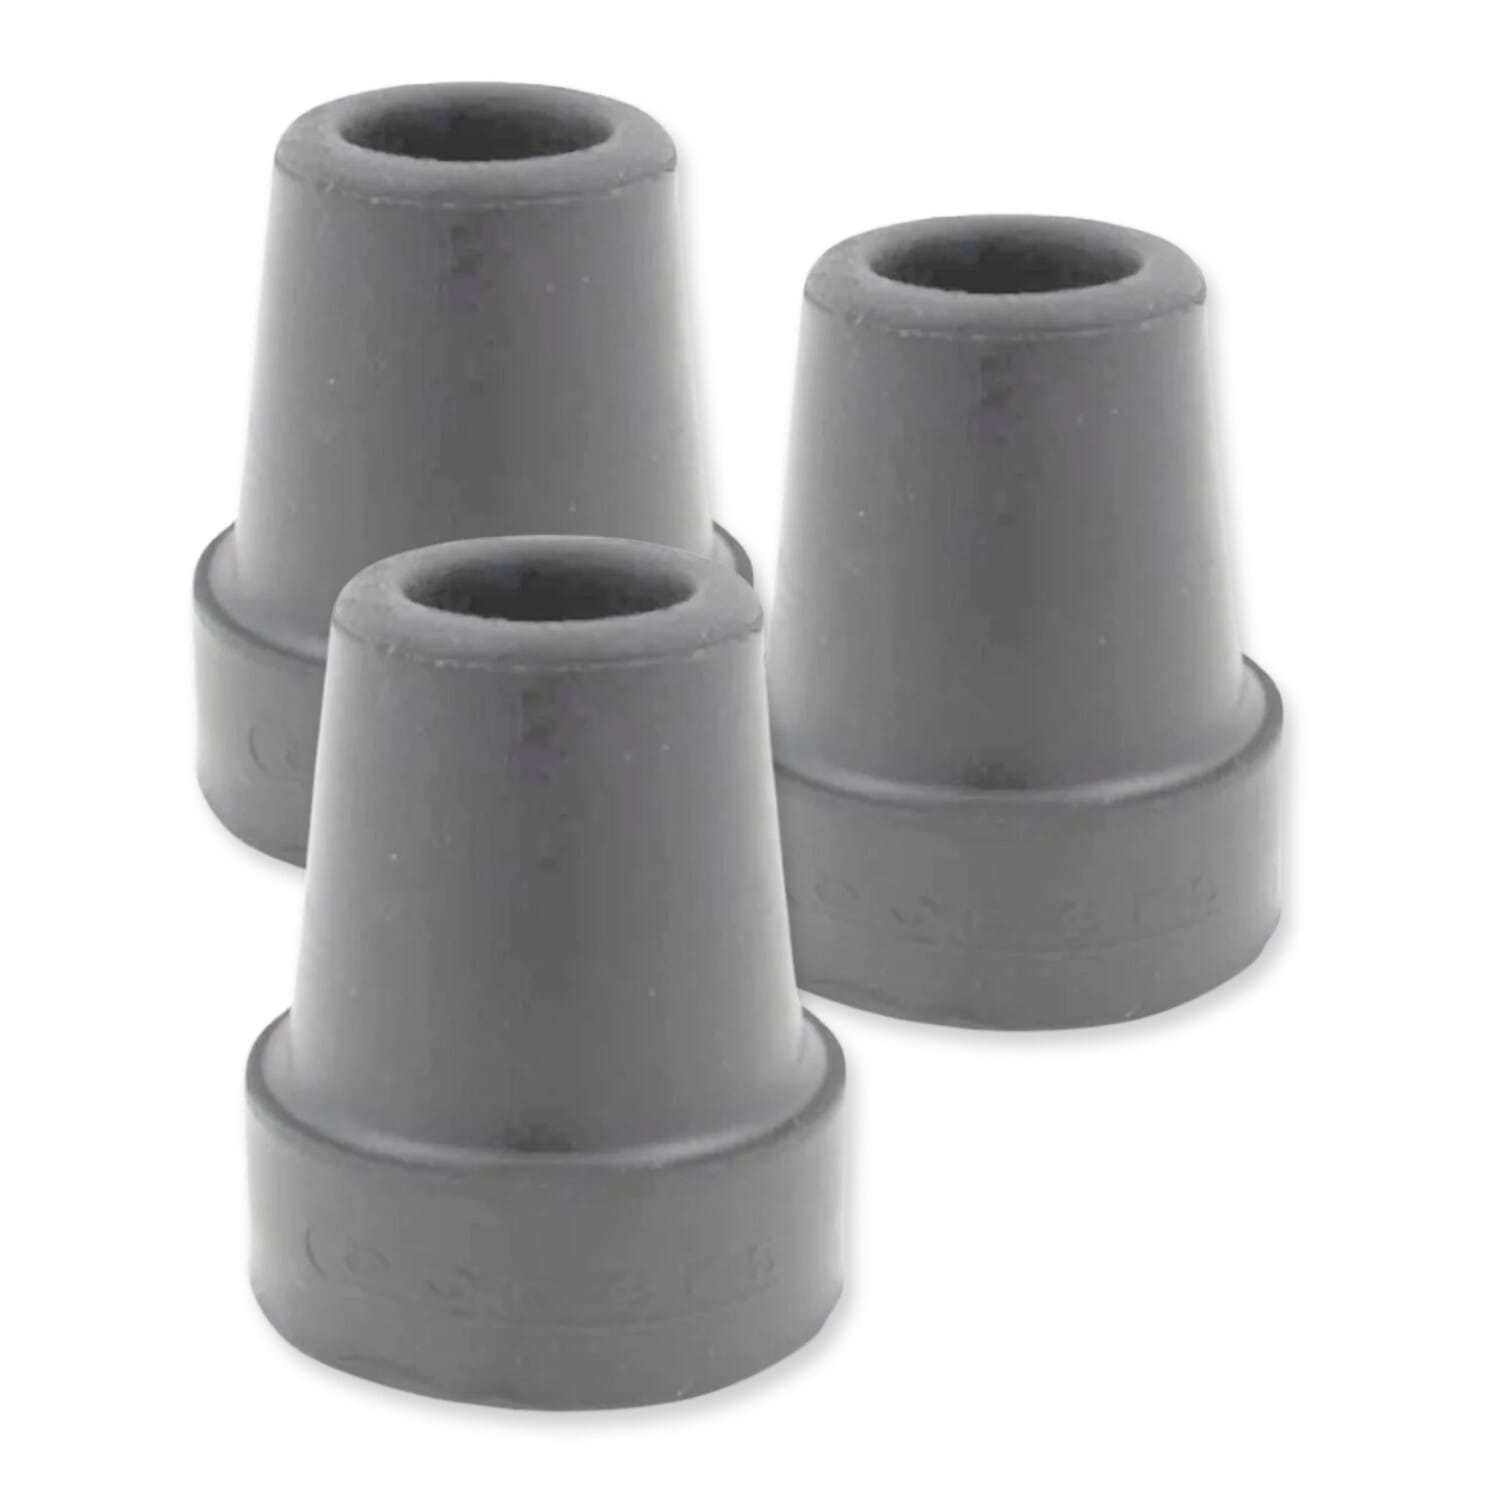 View Rubber Ends For Walking Sticks Rubber Ferrules 19mm grey pack of 3 information